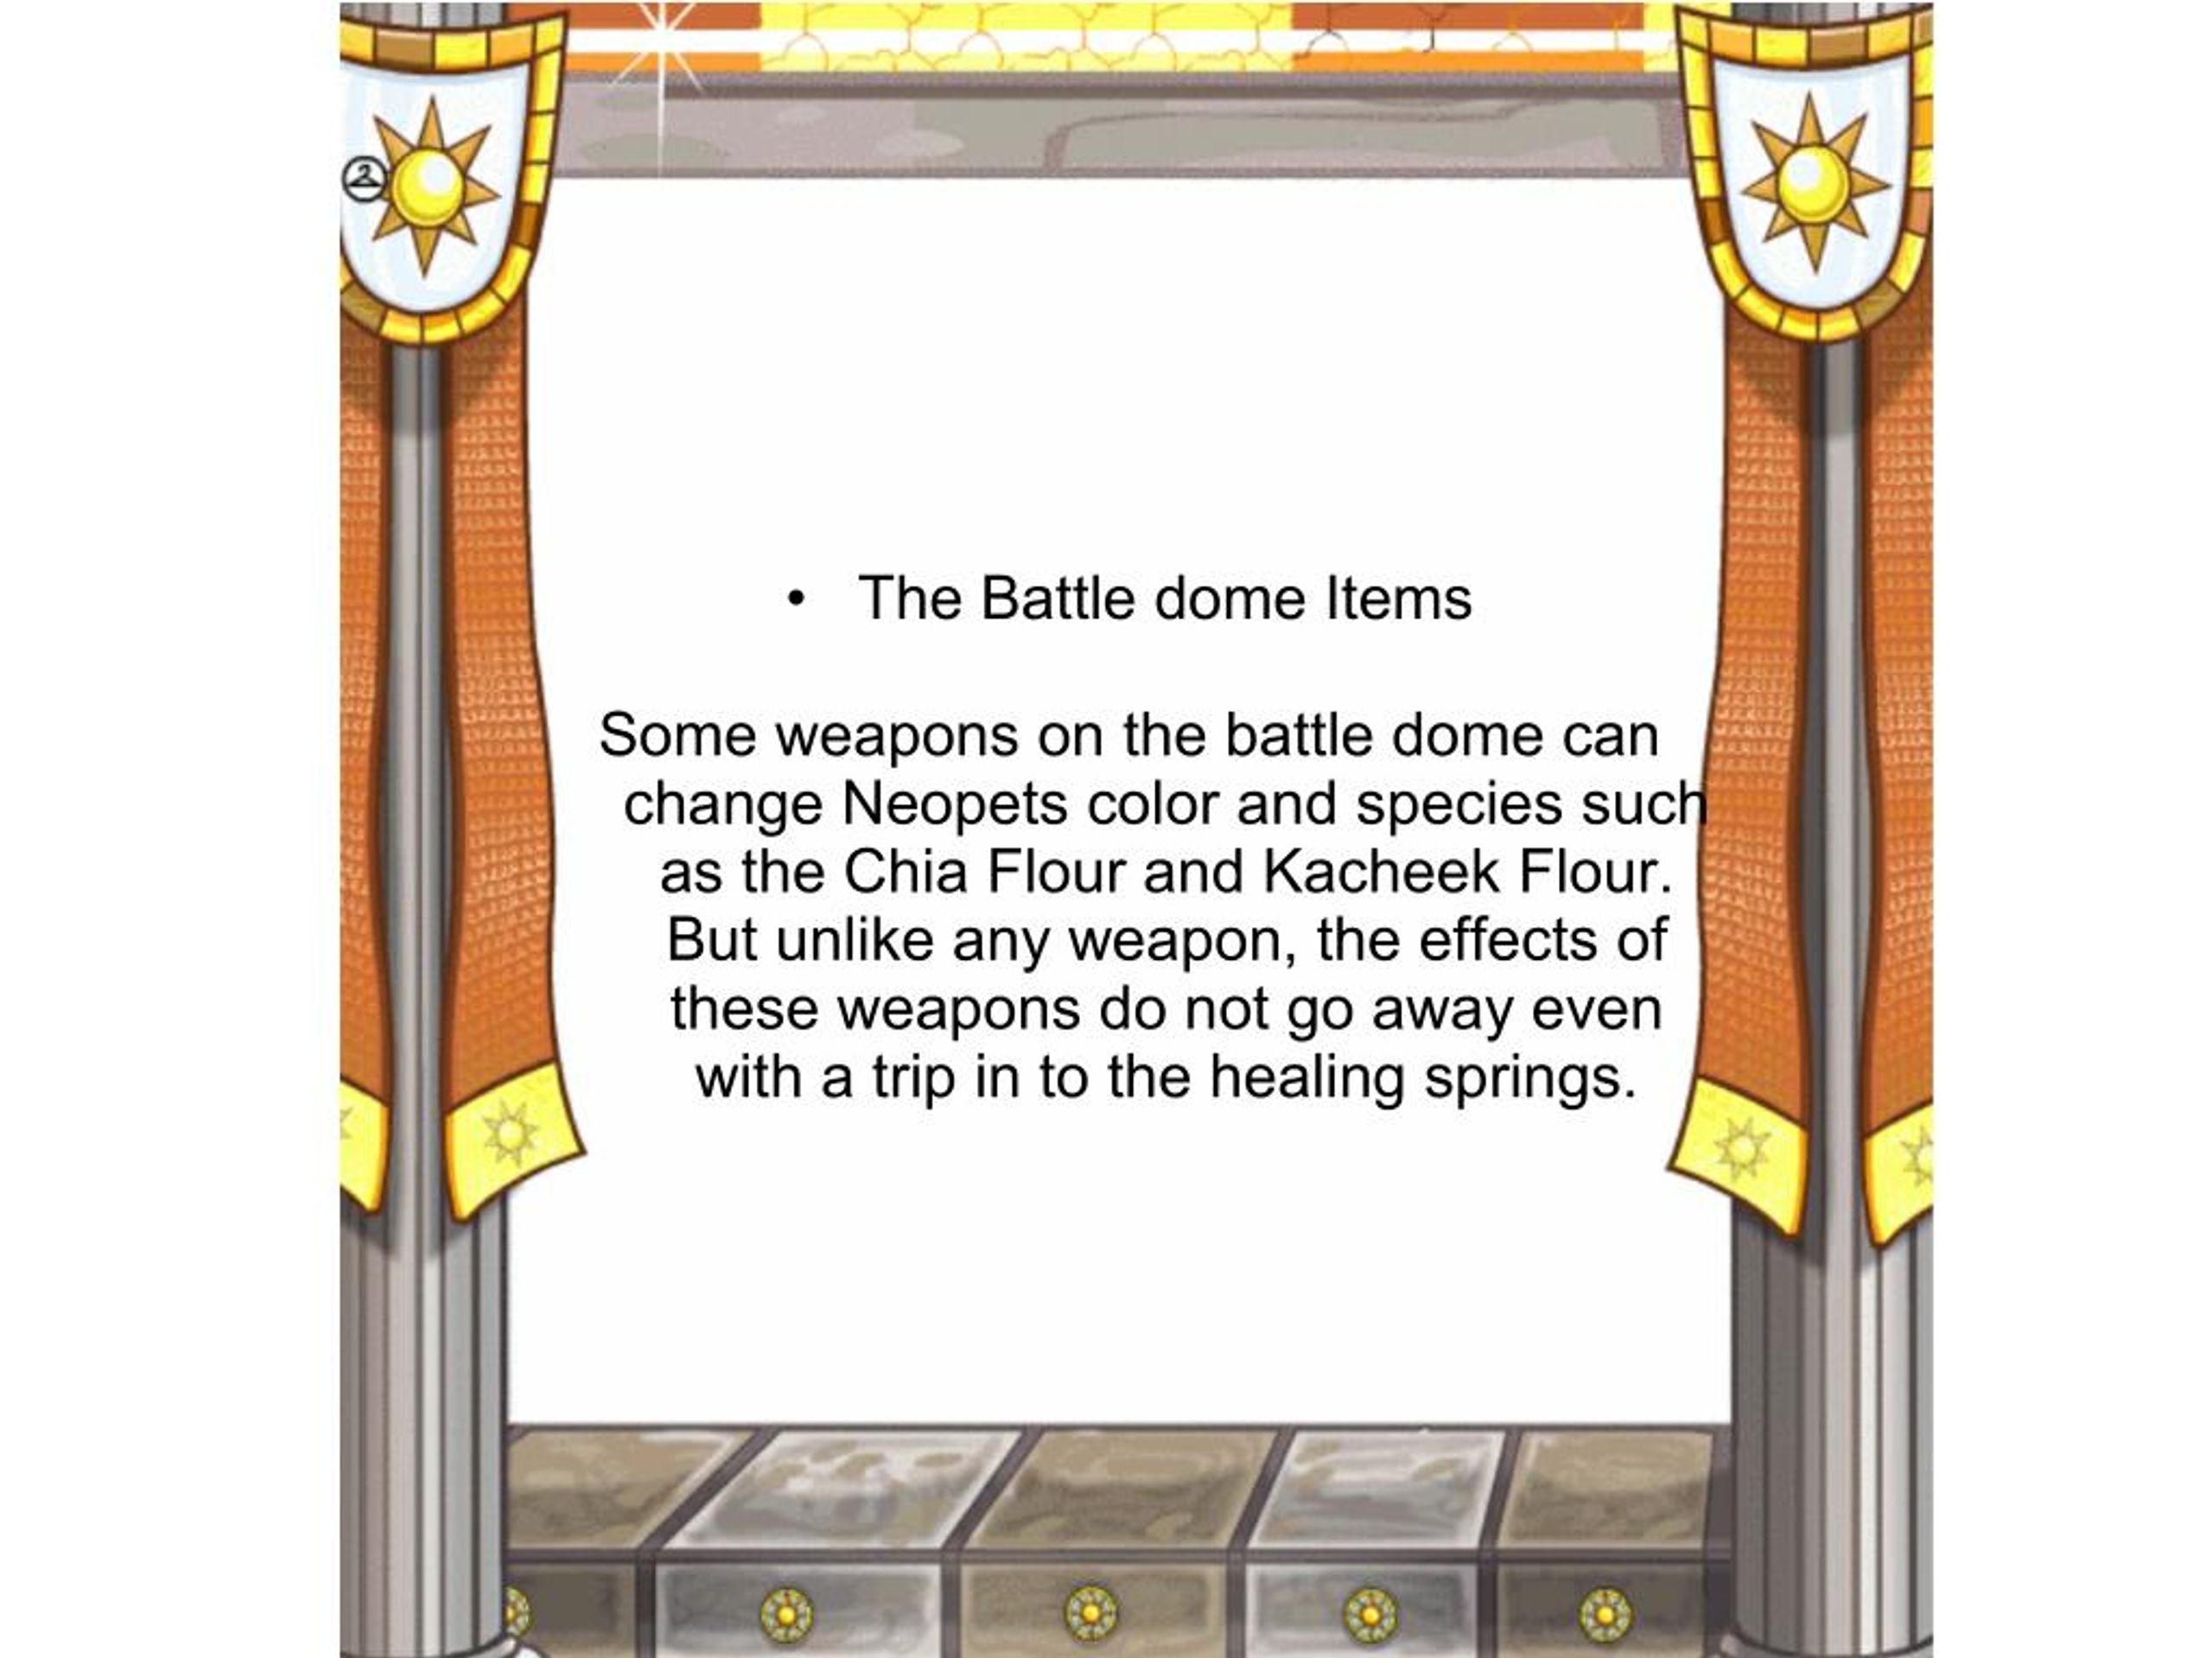 Neopets weapons